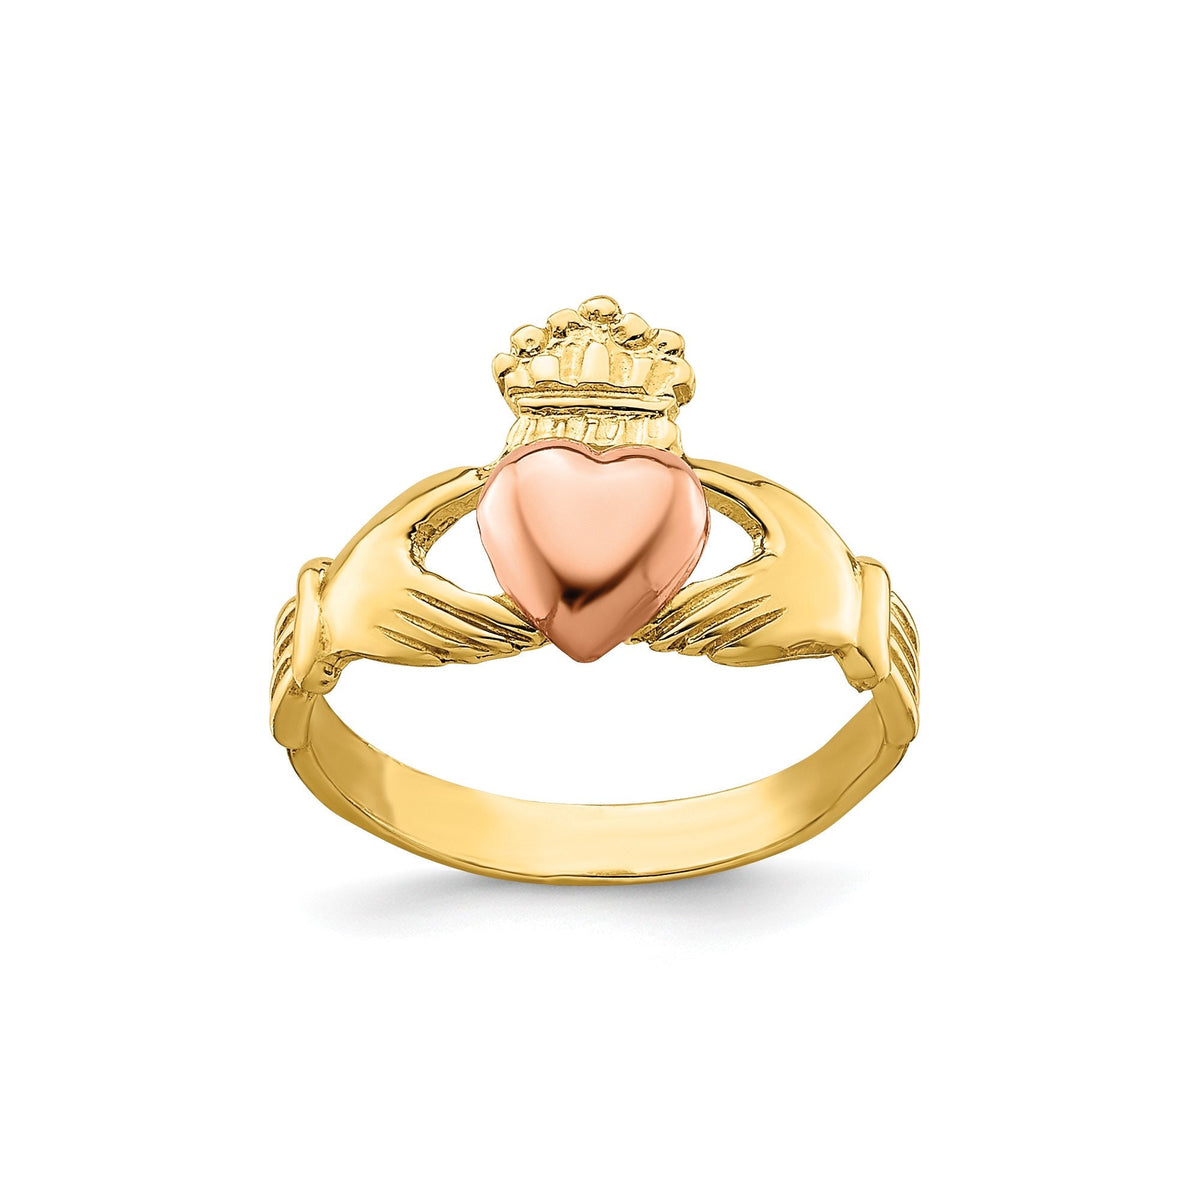 14k Two-tone Baby Claddagh Ring Baby Child  Size 1 -2 Baby to Toddler Size Children's Ring Band with Heart Child Celtic - Gift Box Included